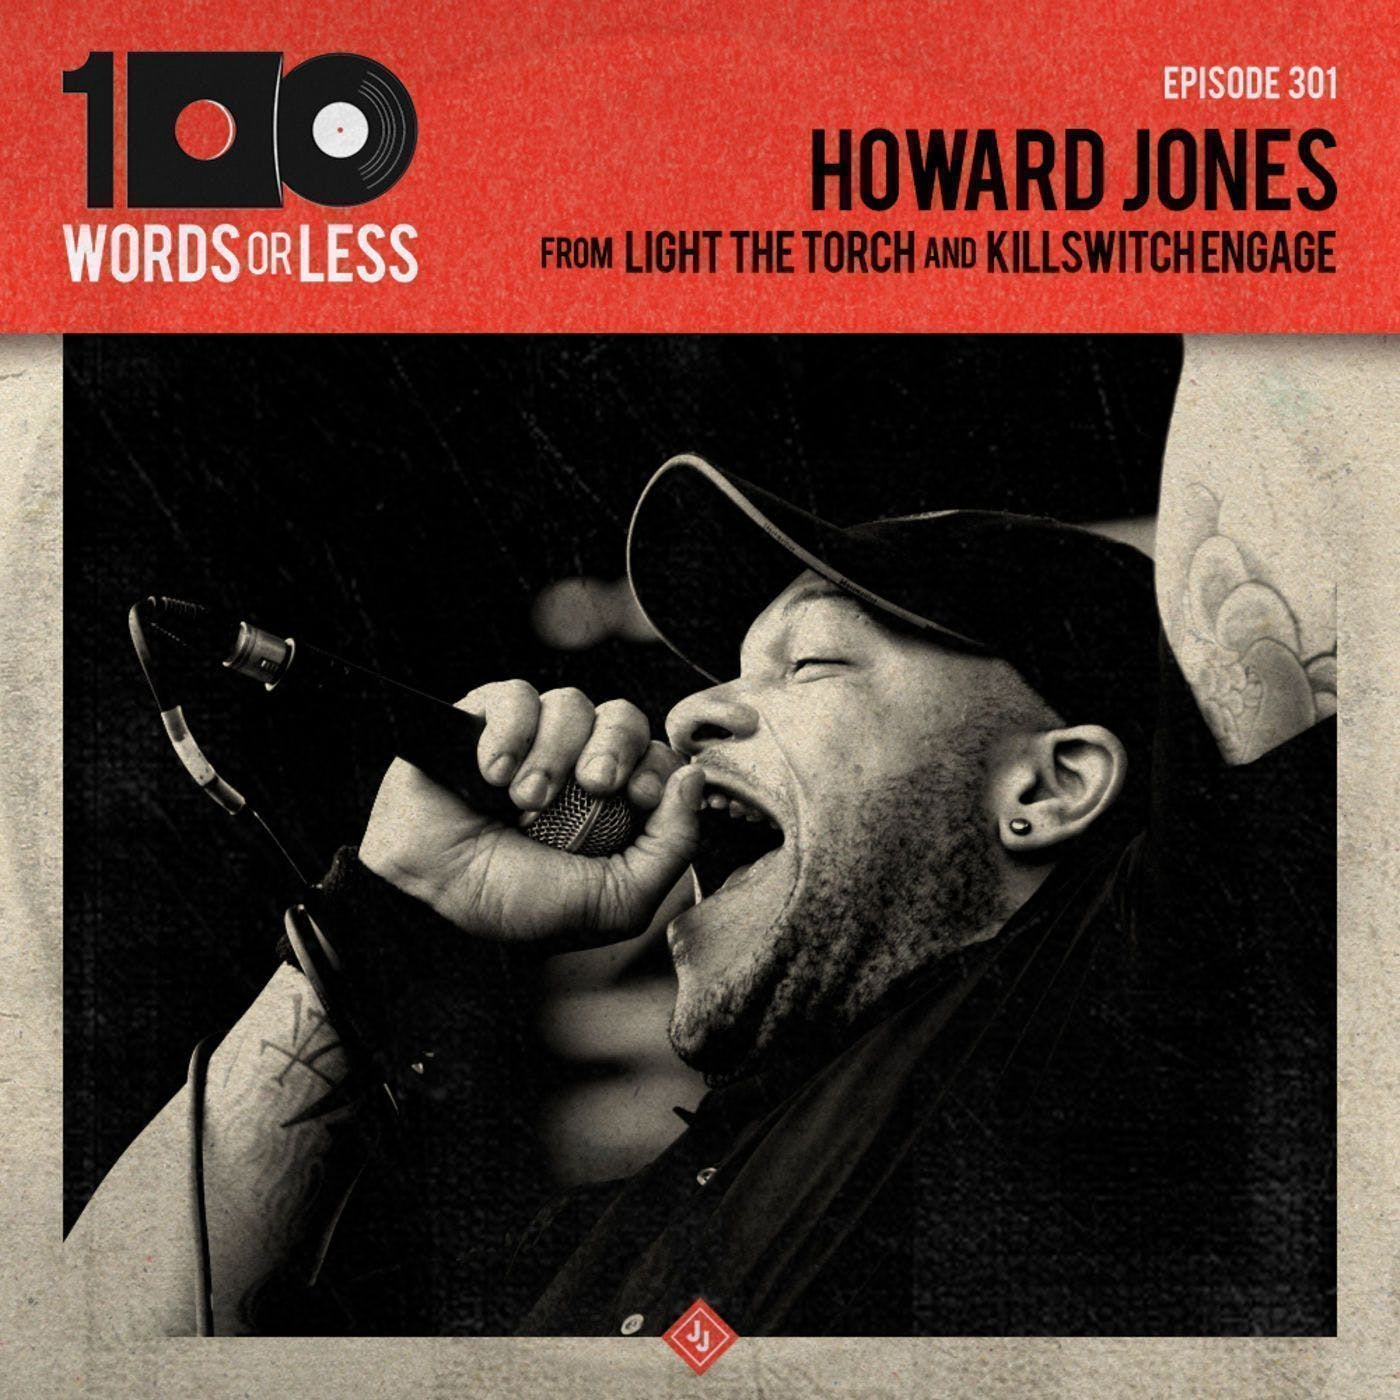 Howard Jones from Light The Torch, Killswitch Engage and Blood Has Been Shed